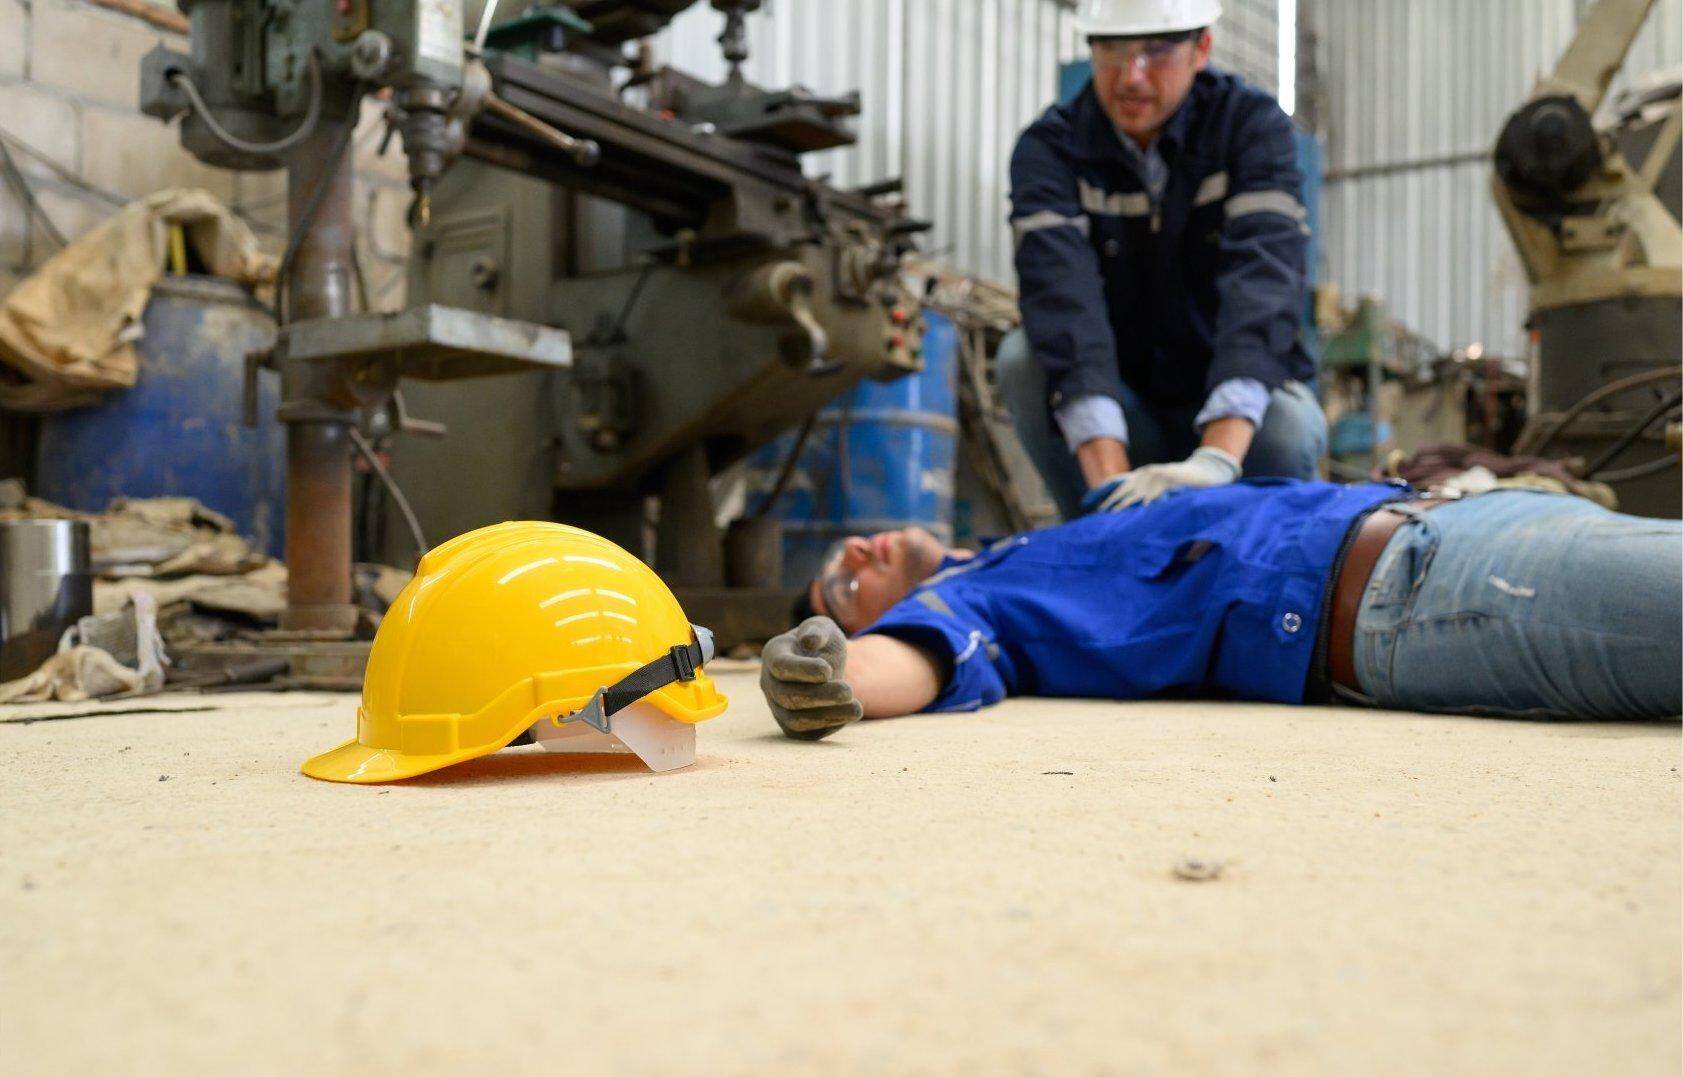 An unconscious man who has been injured on the job who will file for workers compensation in McDonough, Georgia